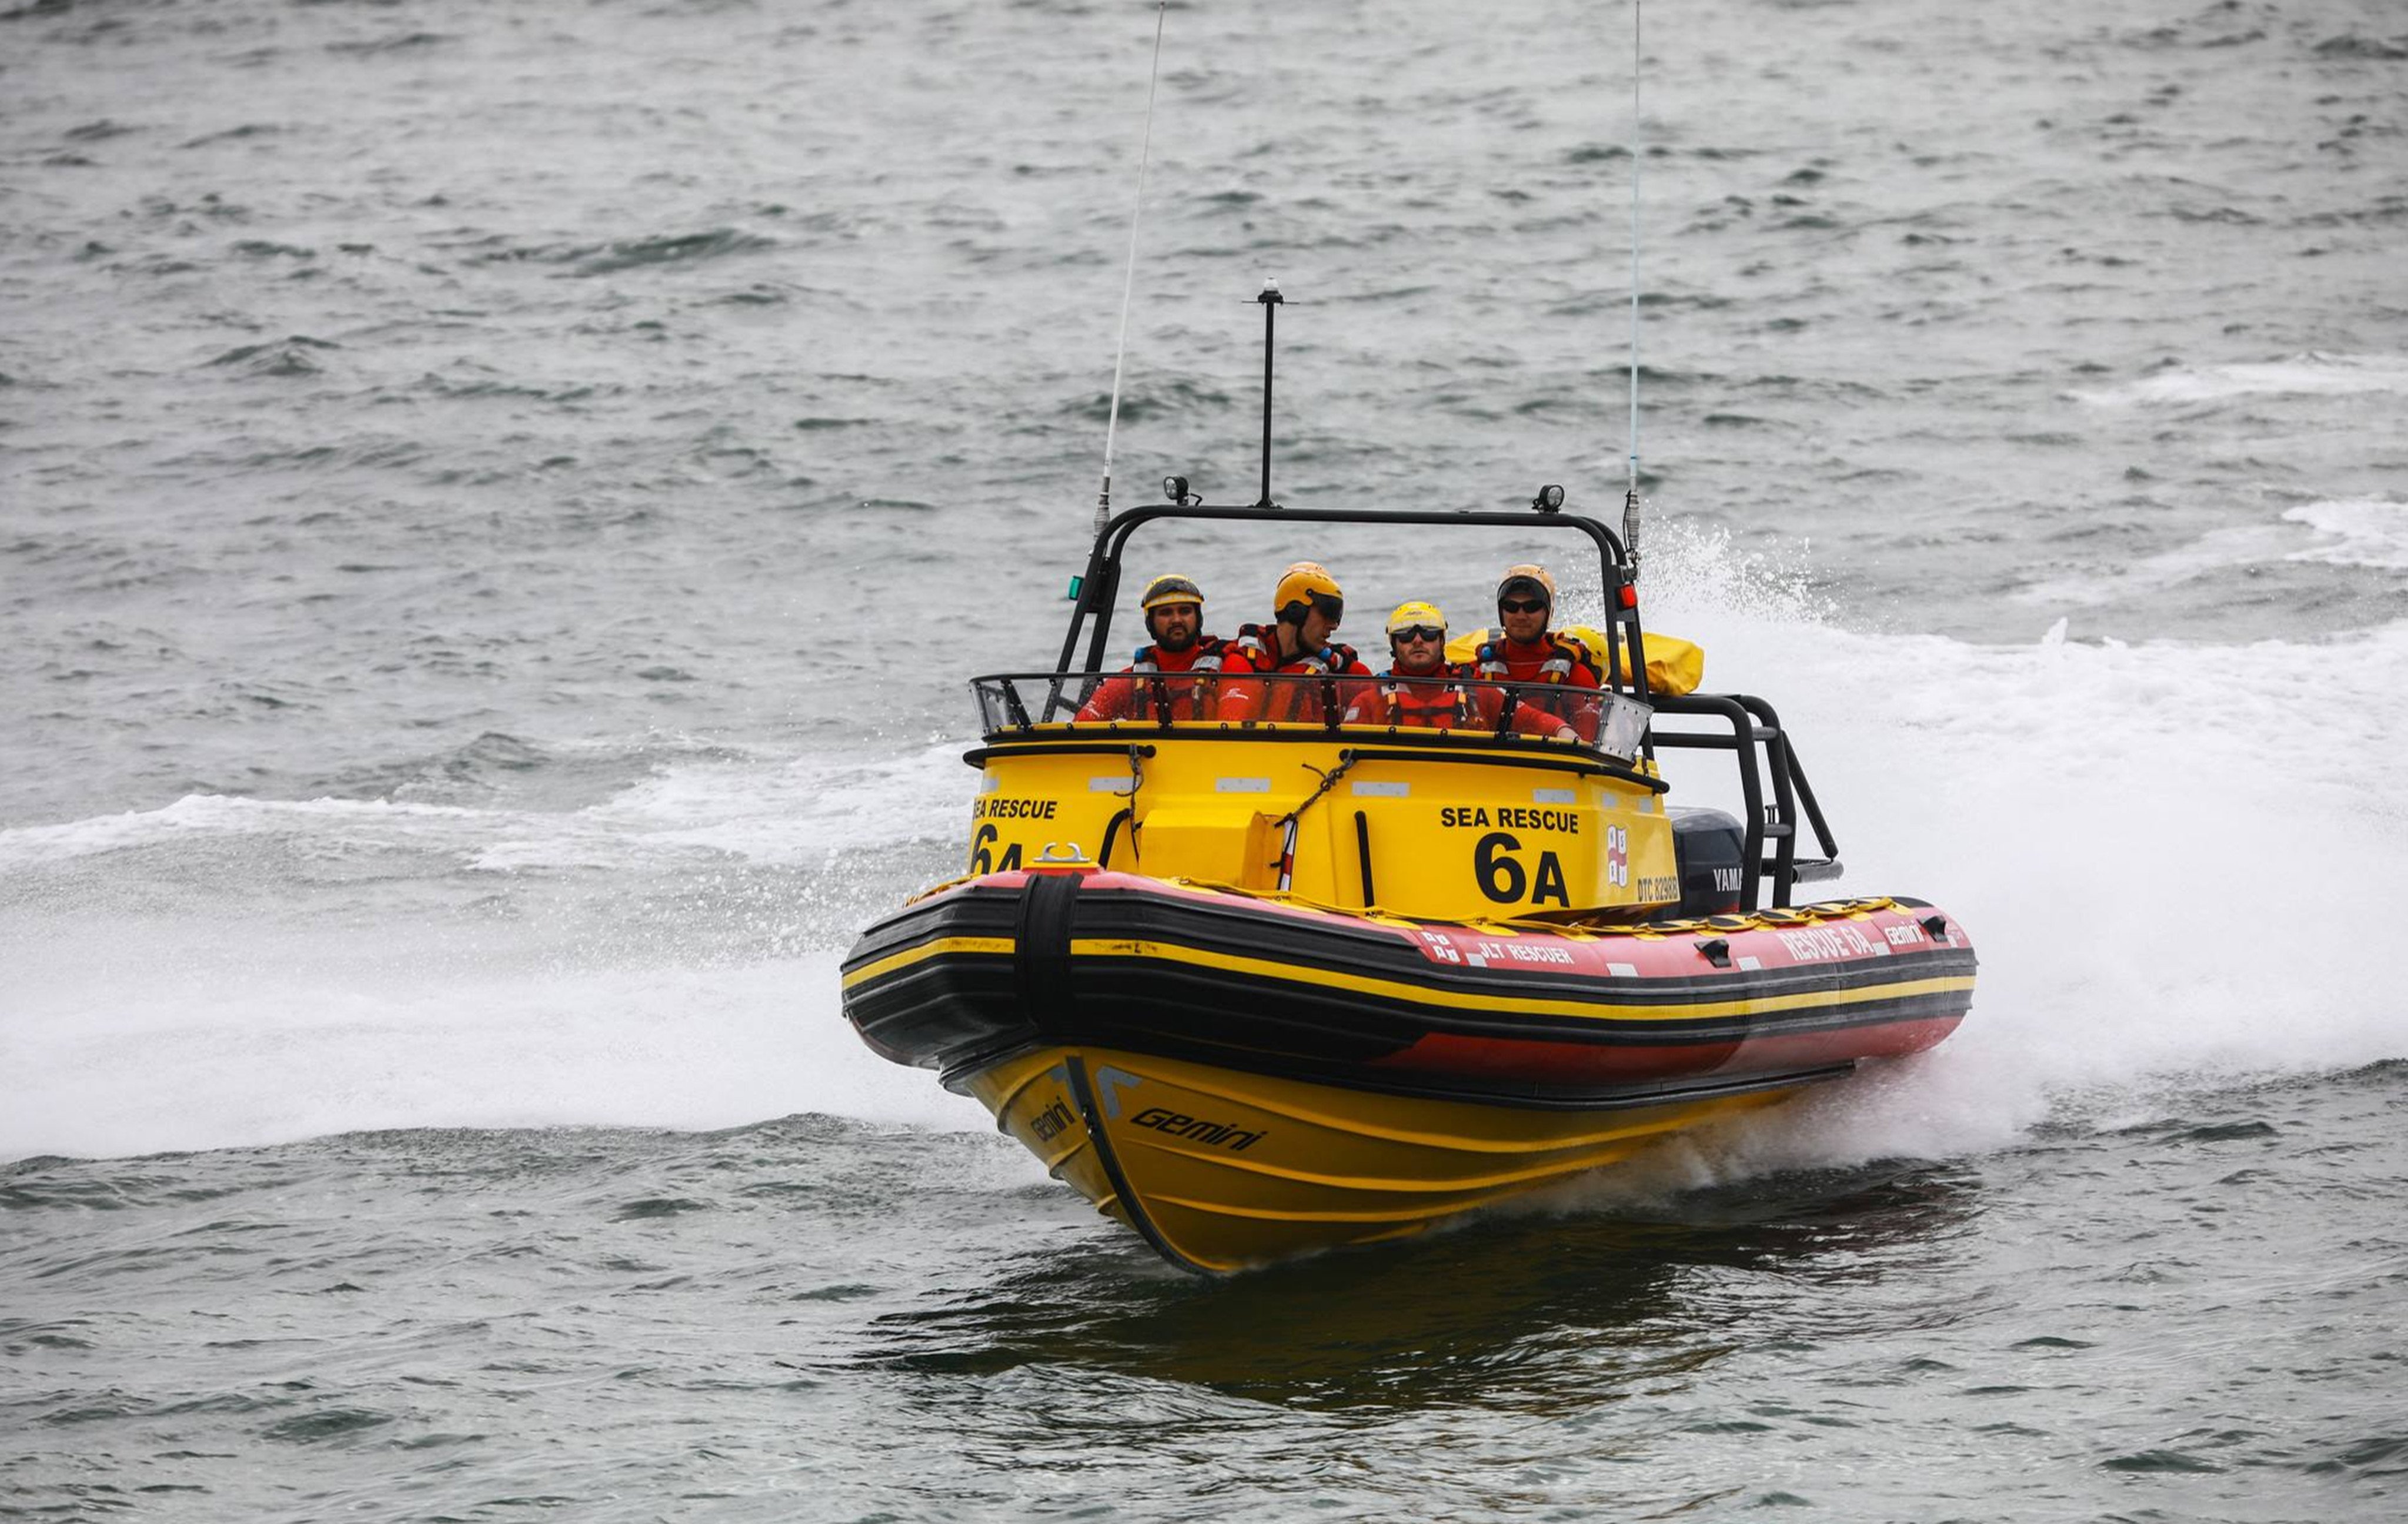 A boat operated by South African sea rescue personnel. A Hongkonger died on a scuba diving trip off Port Elizabeth. Photo: South African National Sea Rescue Institute